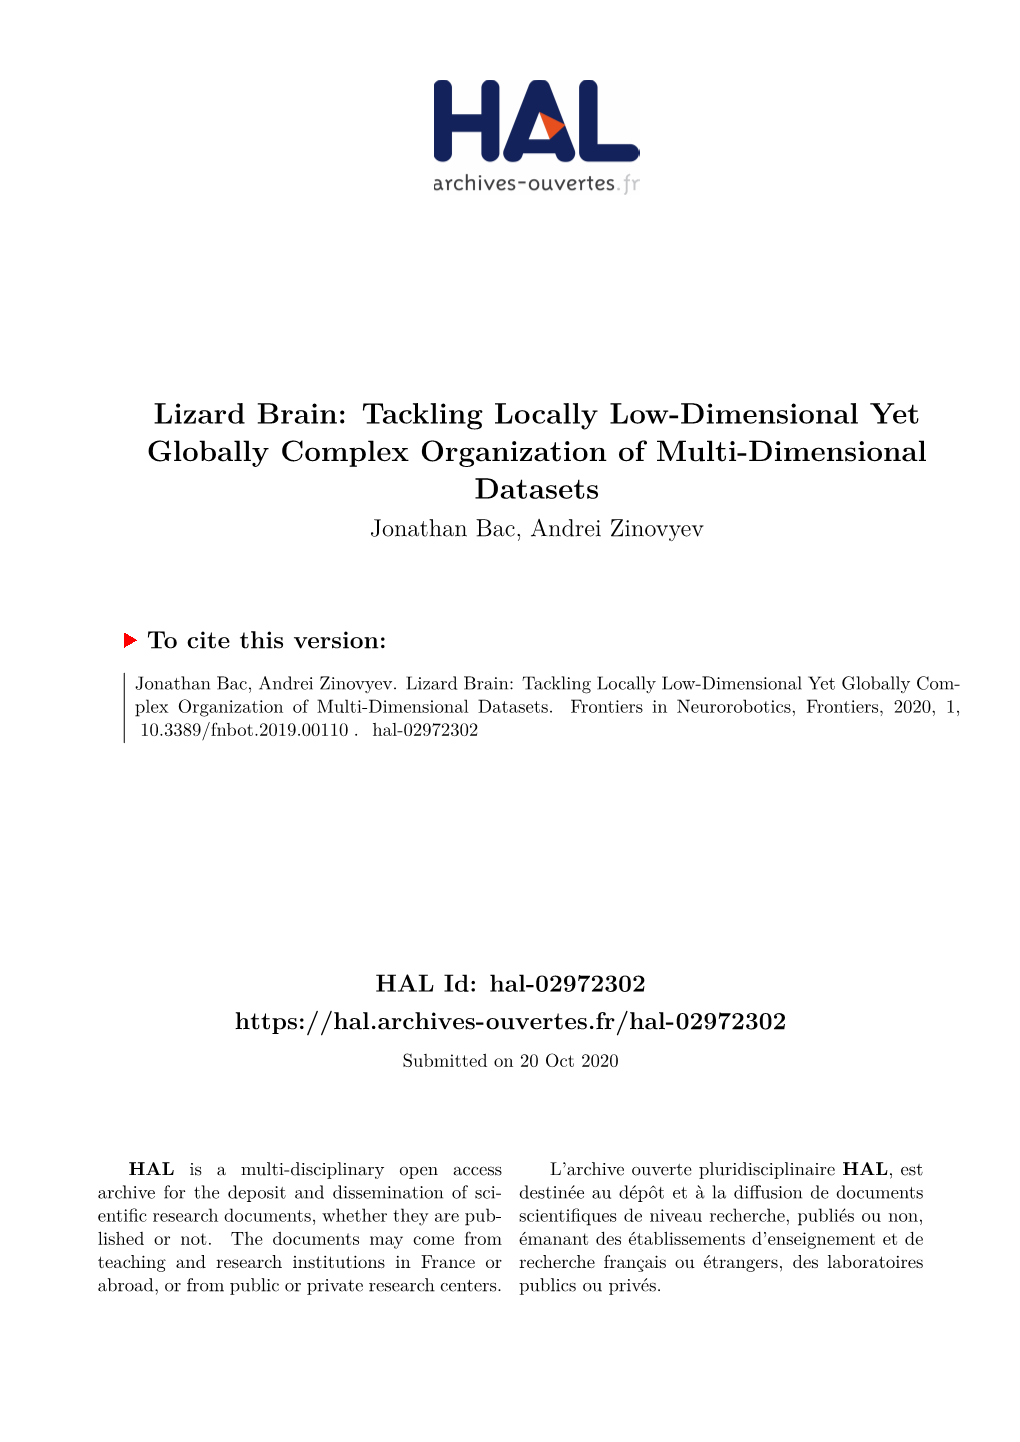 Tackling Locally Low-Dimensional Yet Globally Complex Organization of Multi-Dimensional Datasets Jonathan Bac, Andrei Zinovyev